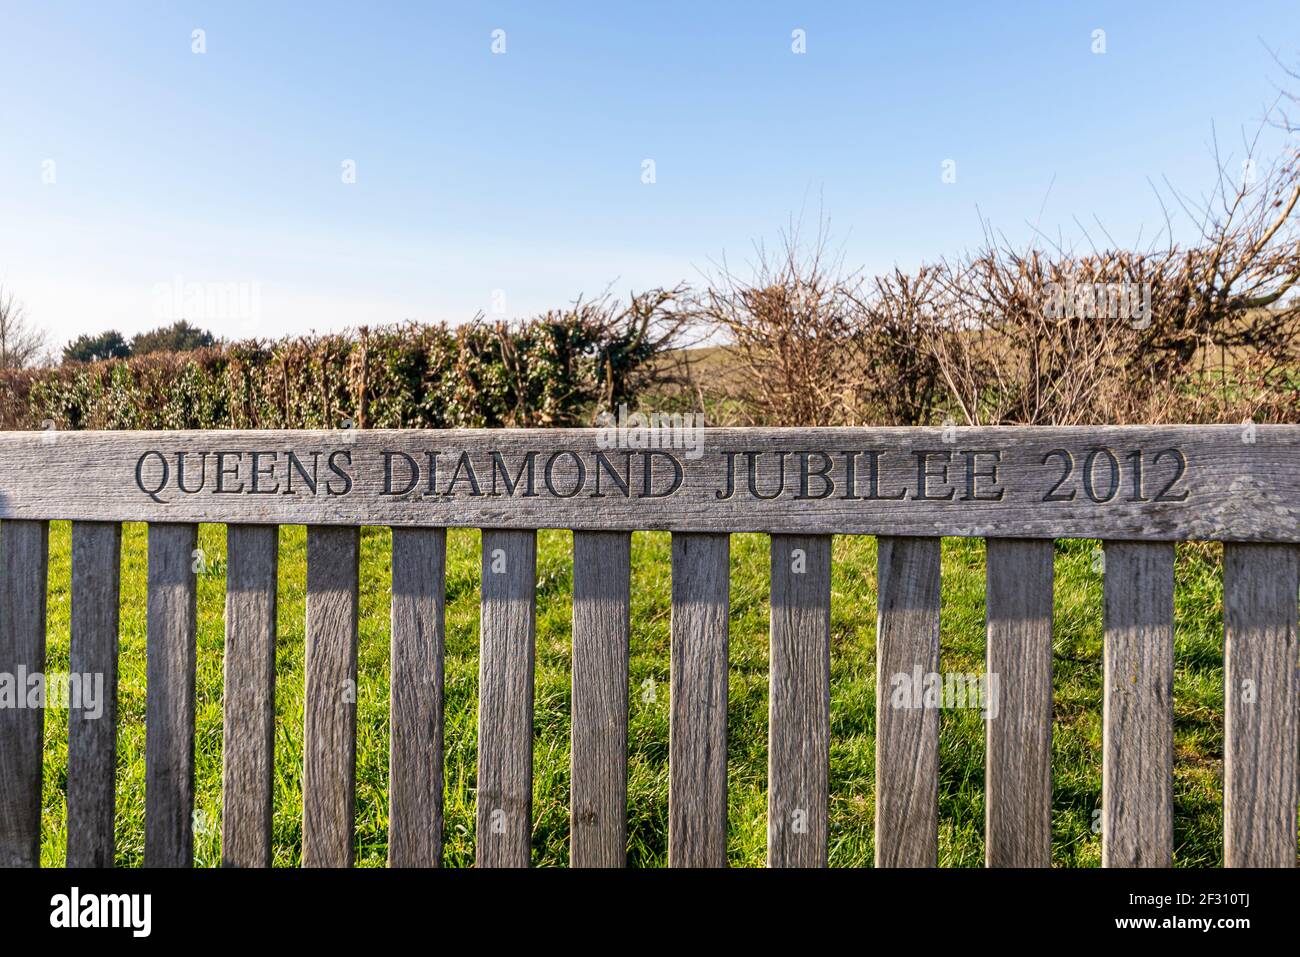 Queen's Diamond Jubilee 2012 carved wooden bench in Canewdon, Essex, UK. Rural village Stock Photo